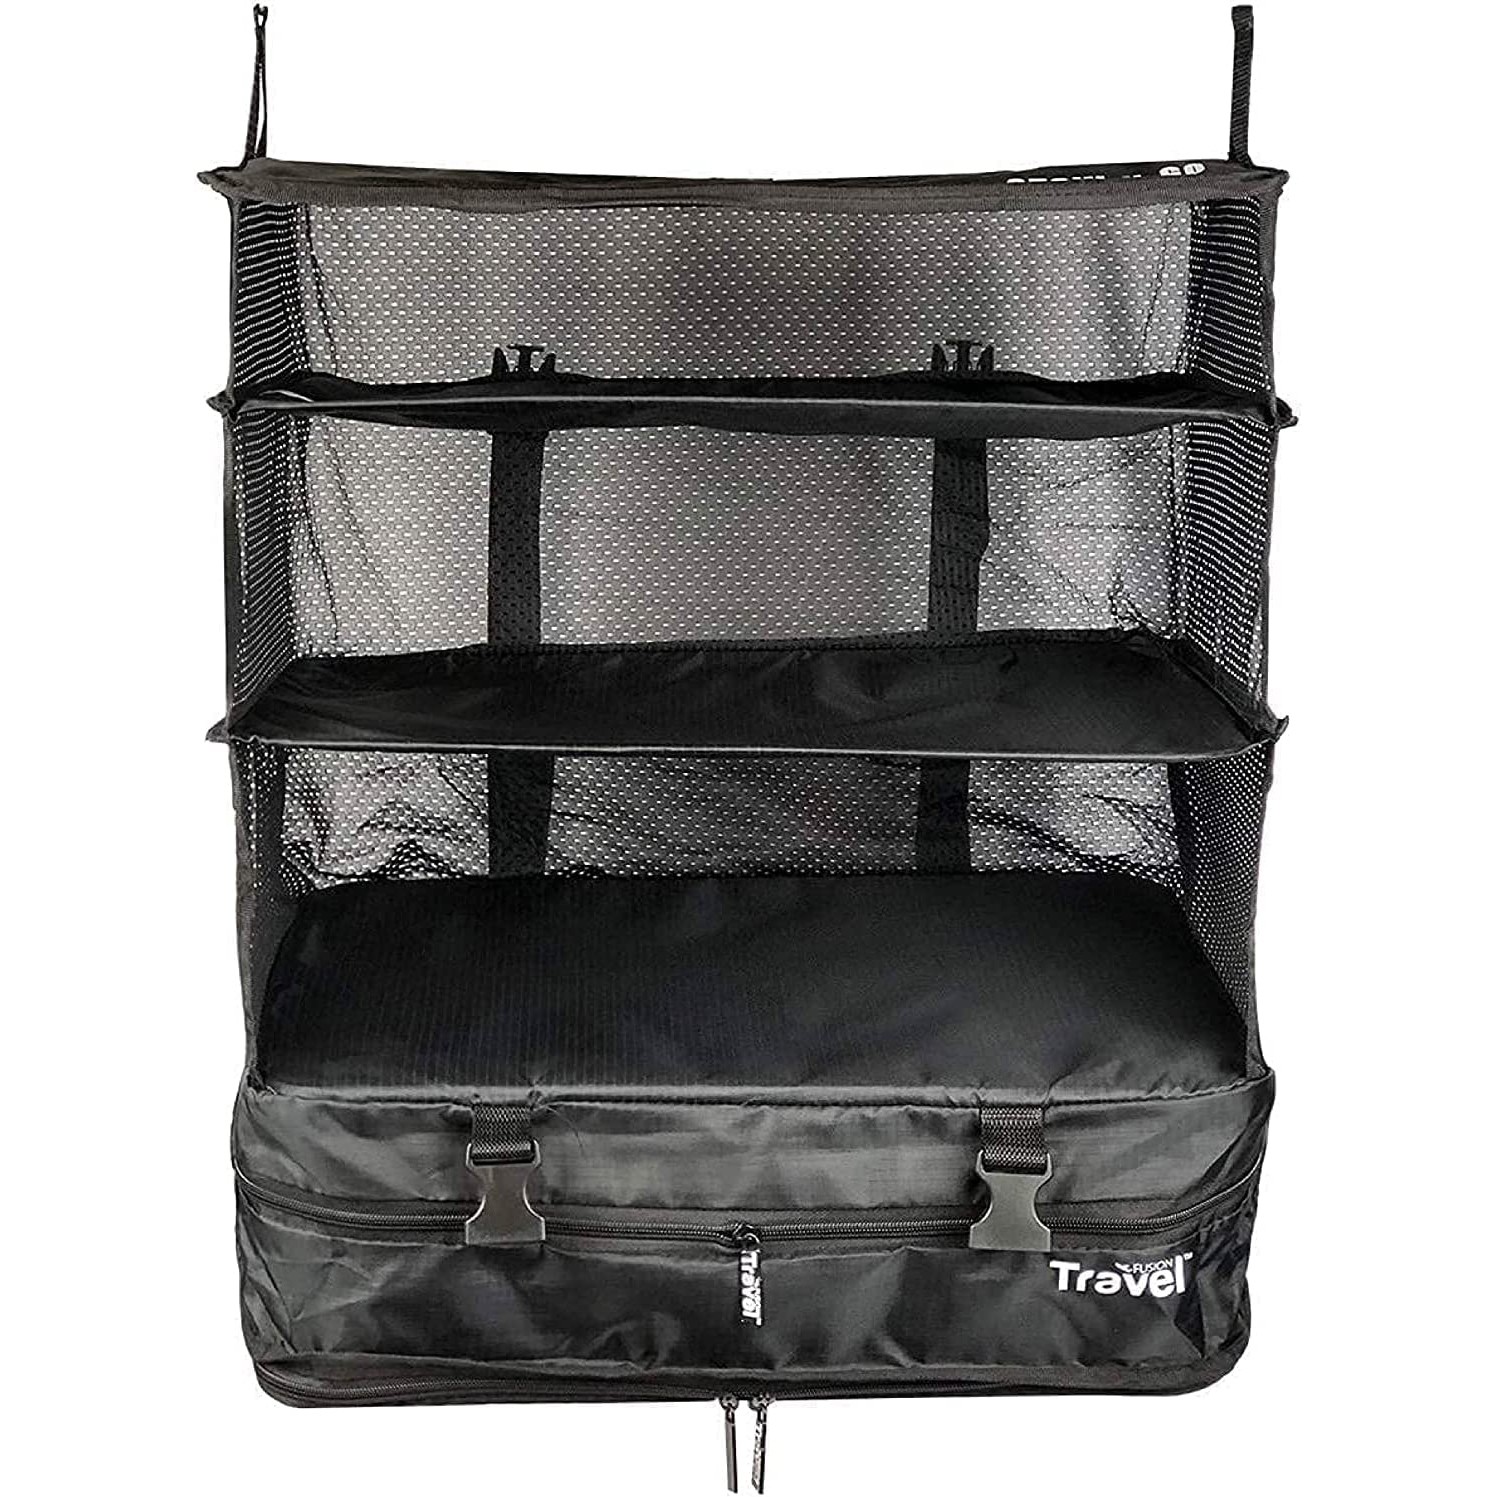 https://video-images.vice.com//products/64936d7bb2cfd4e700498801/gallery-image/1687383420463-stow-n-go-luggage-organizer.jpeg?crop=0.5625xw:1xh;center,center